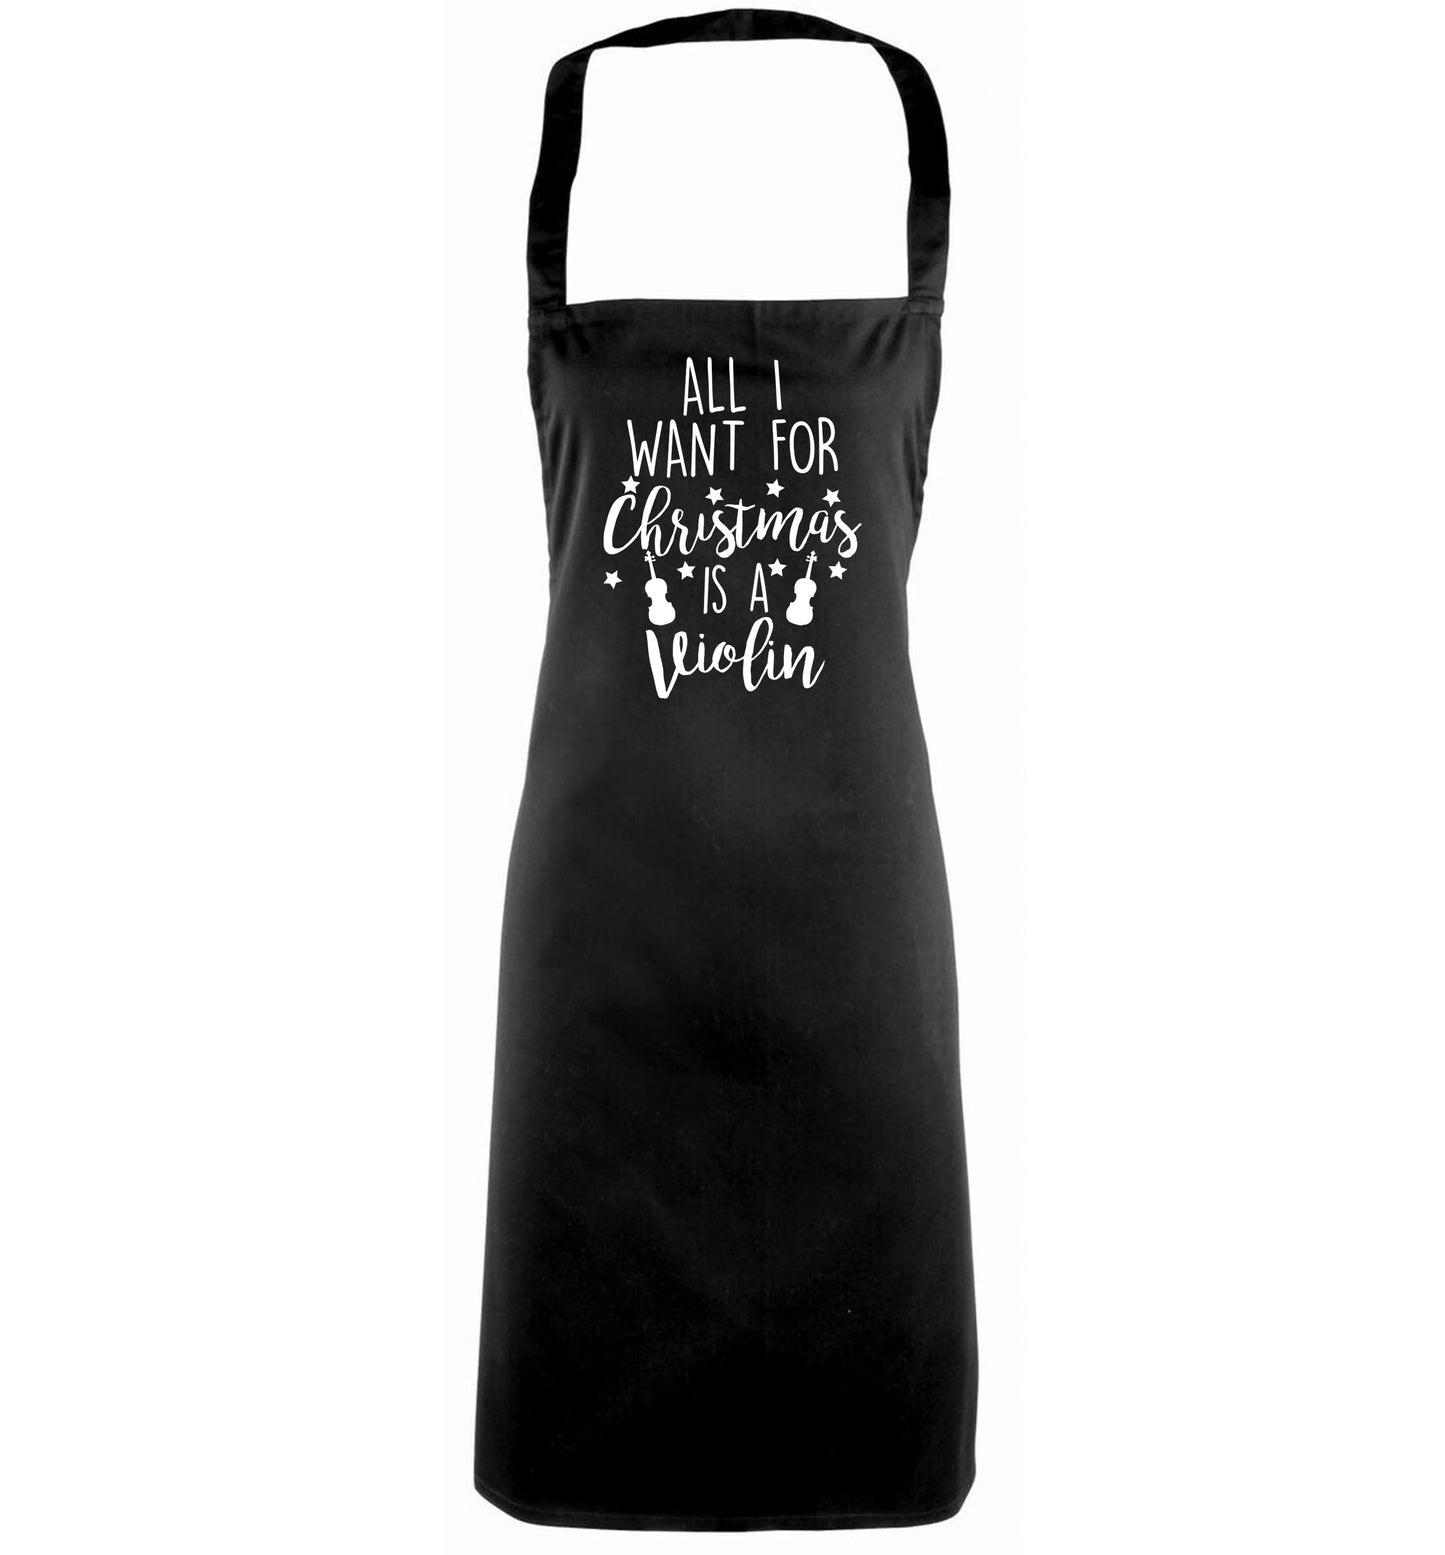 All I Want For Christmas is a Violin black apron